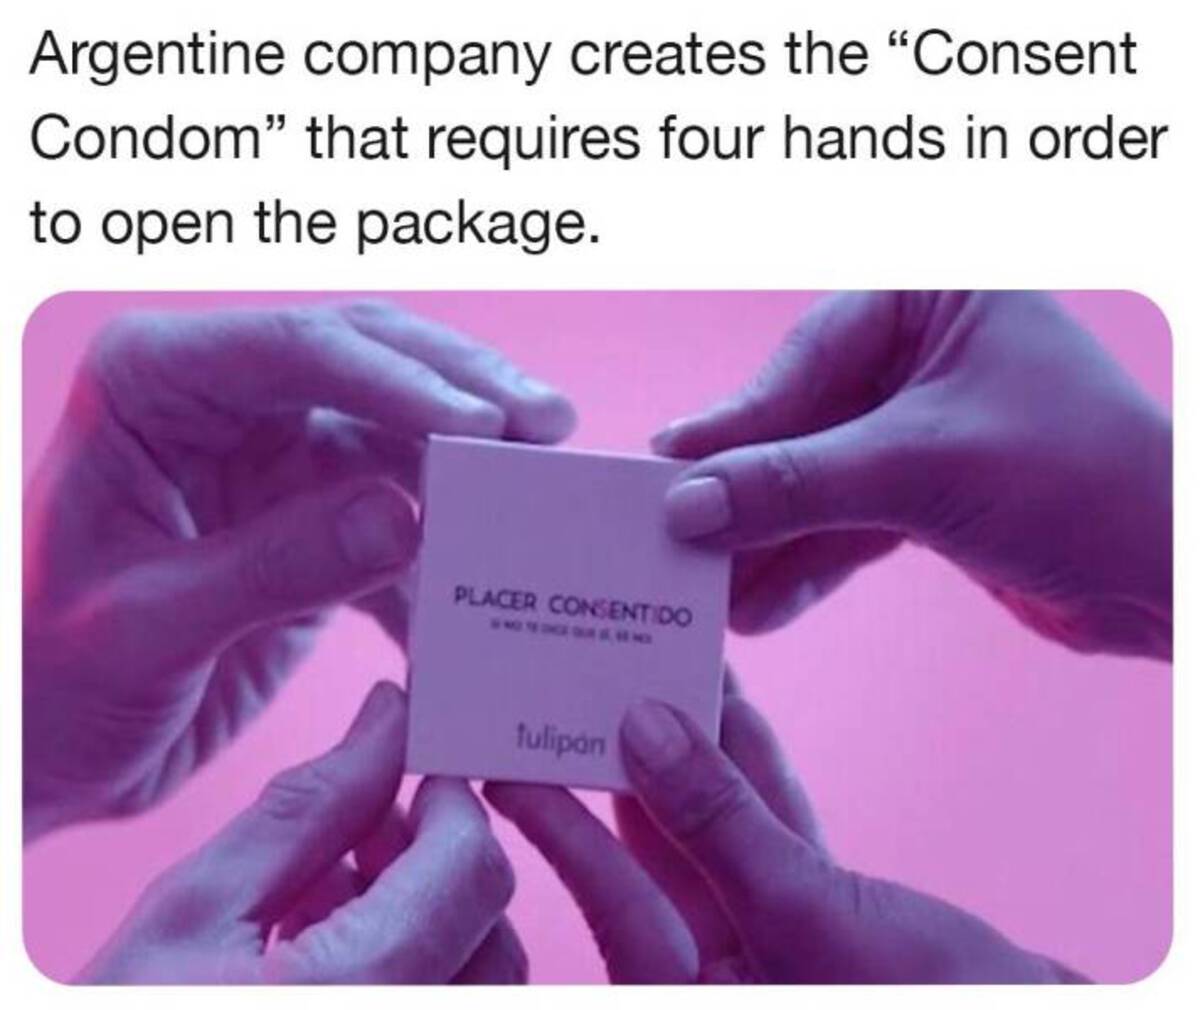 consent condom meme - Argentine company creates the "Consent Condom" that requires four hands in order to open the package. Placer Consentido Tulipn